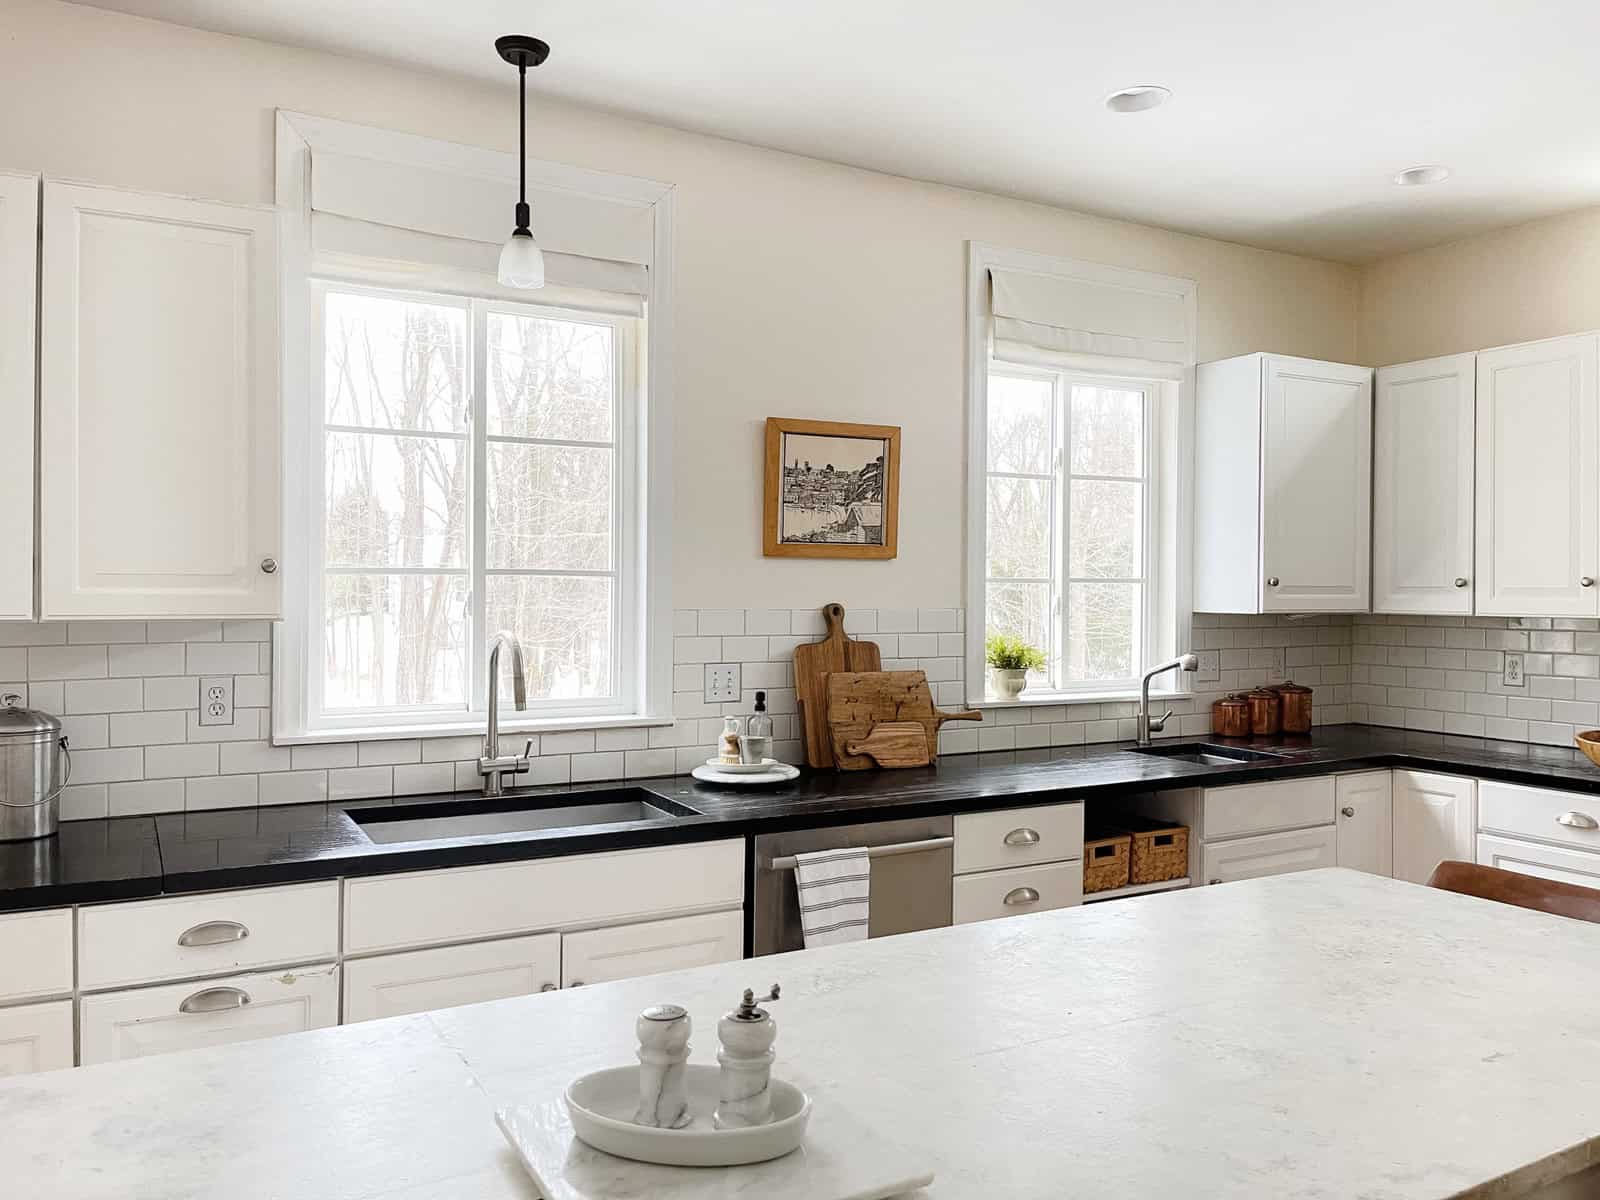 White kitchen cabinets with black counters and two sinks.